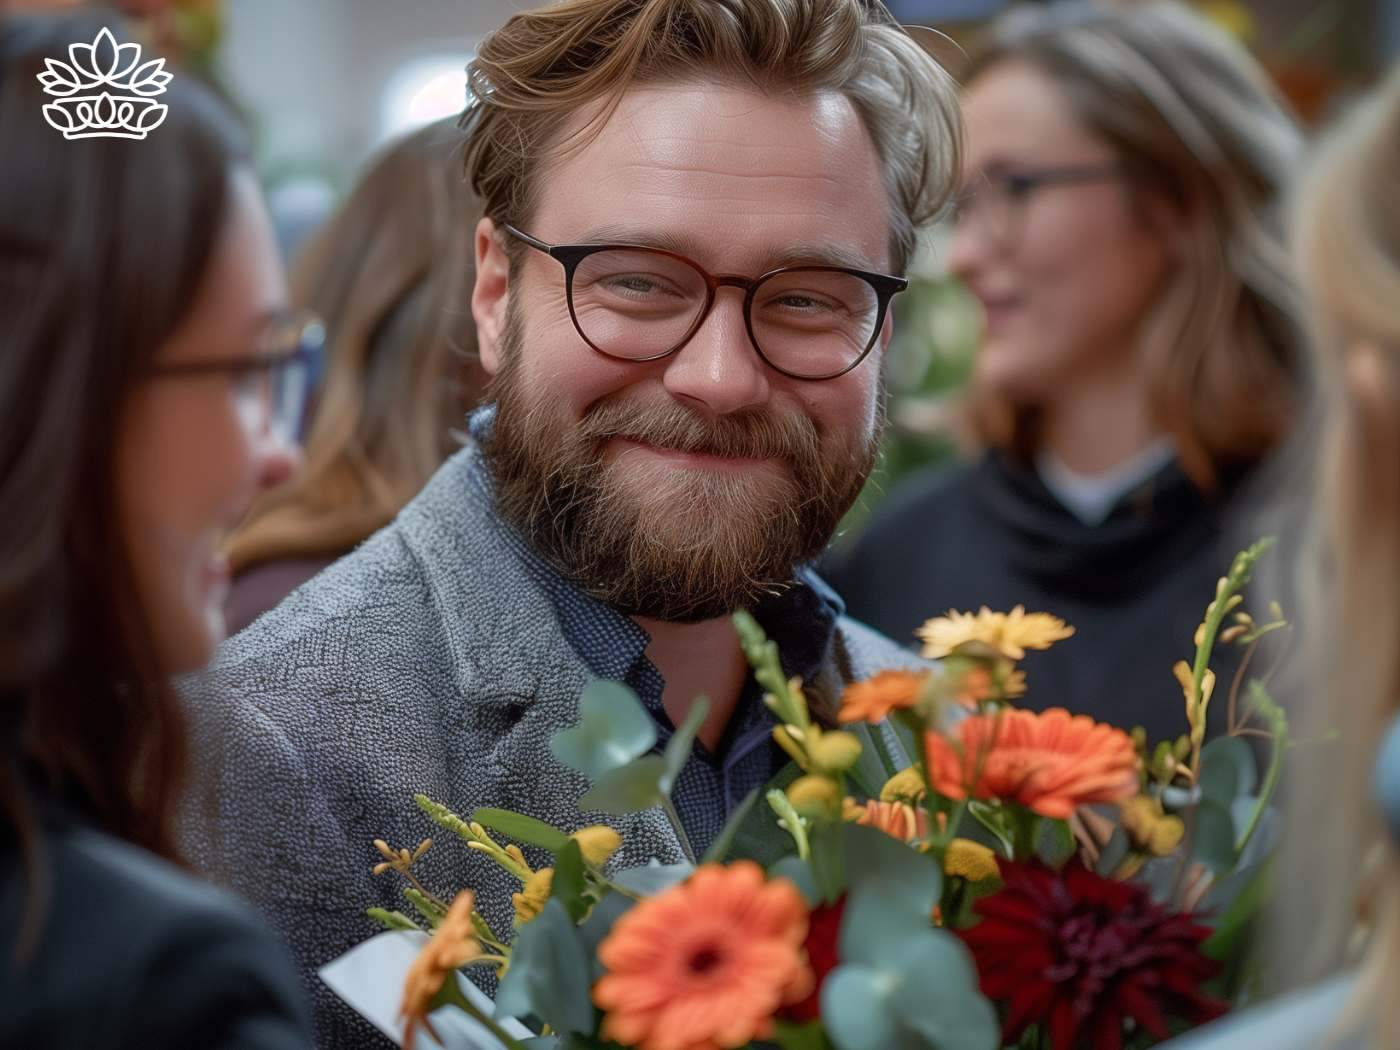 Joyful man with glasses and a welcoming smile at a social gathering, adorned with vibrant autumnal flowers from Fabulous Flowers and Gifts.